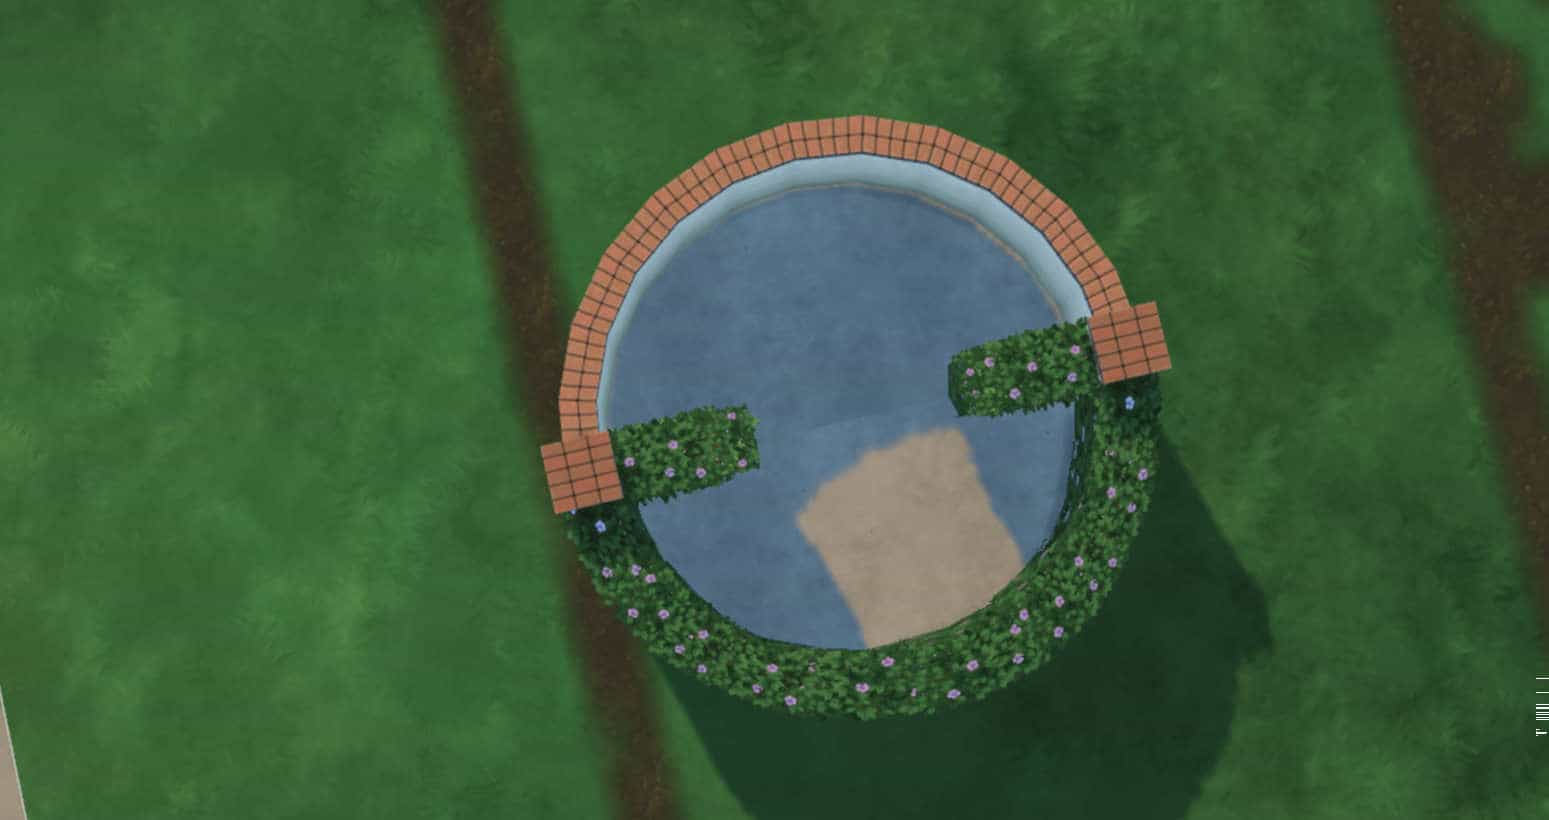 Sims 4: How to build round rooms and curved walls, sorta